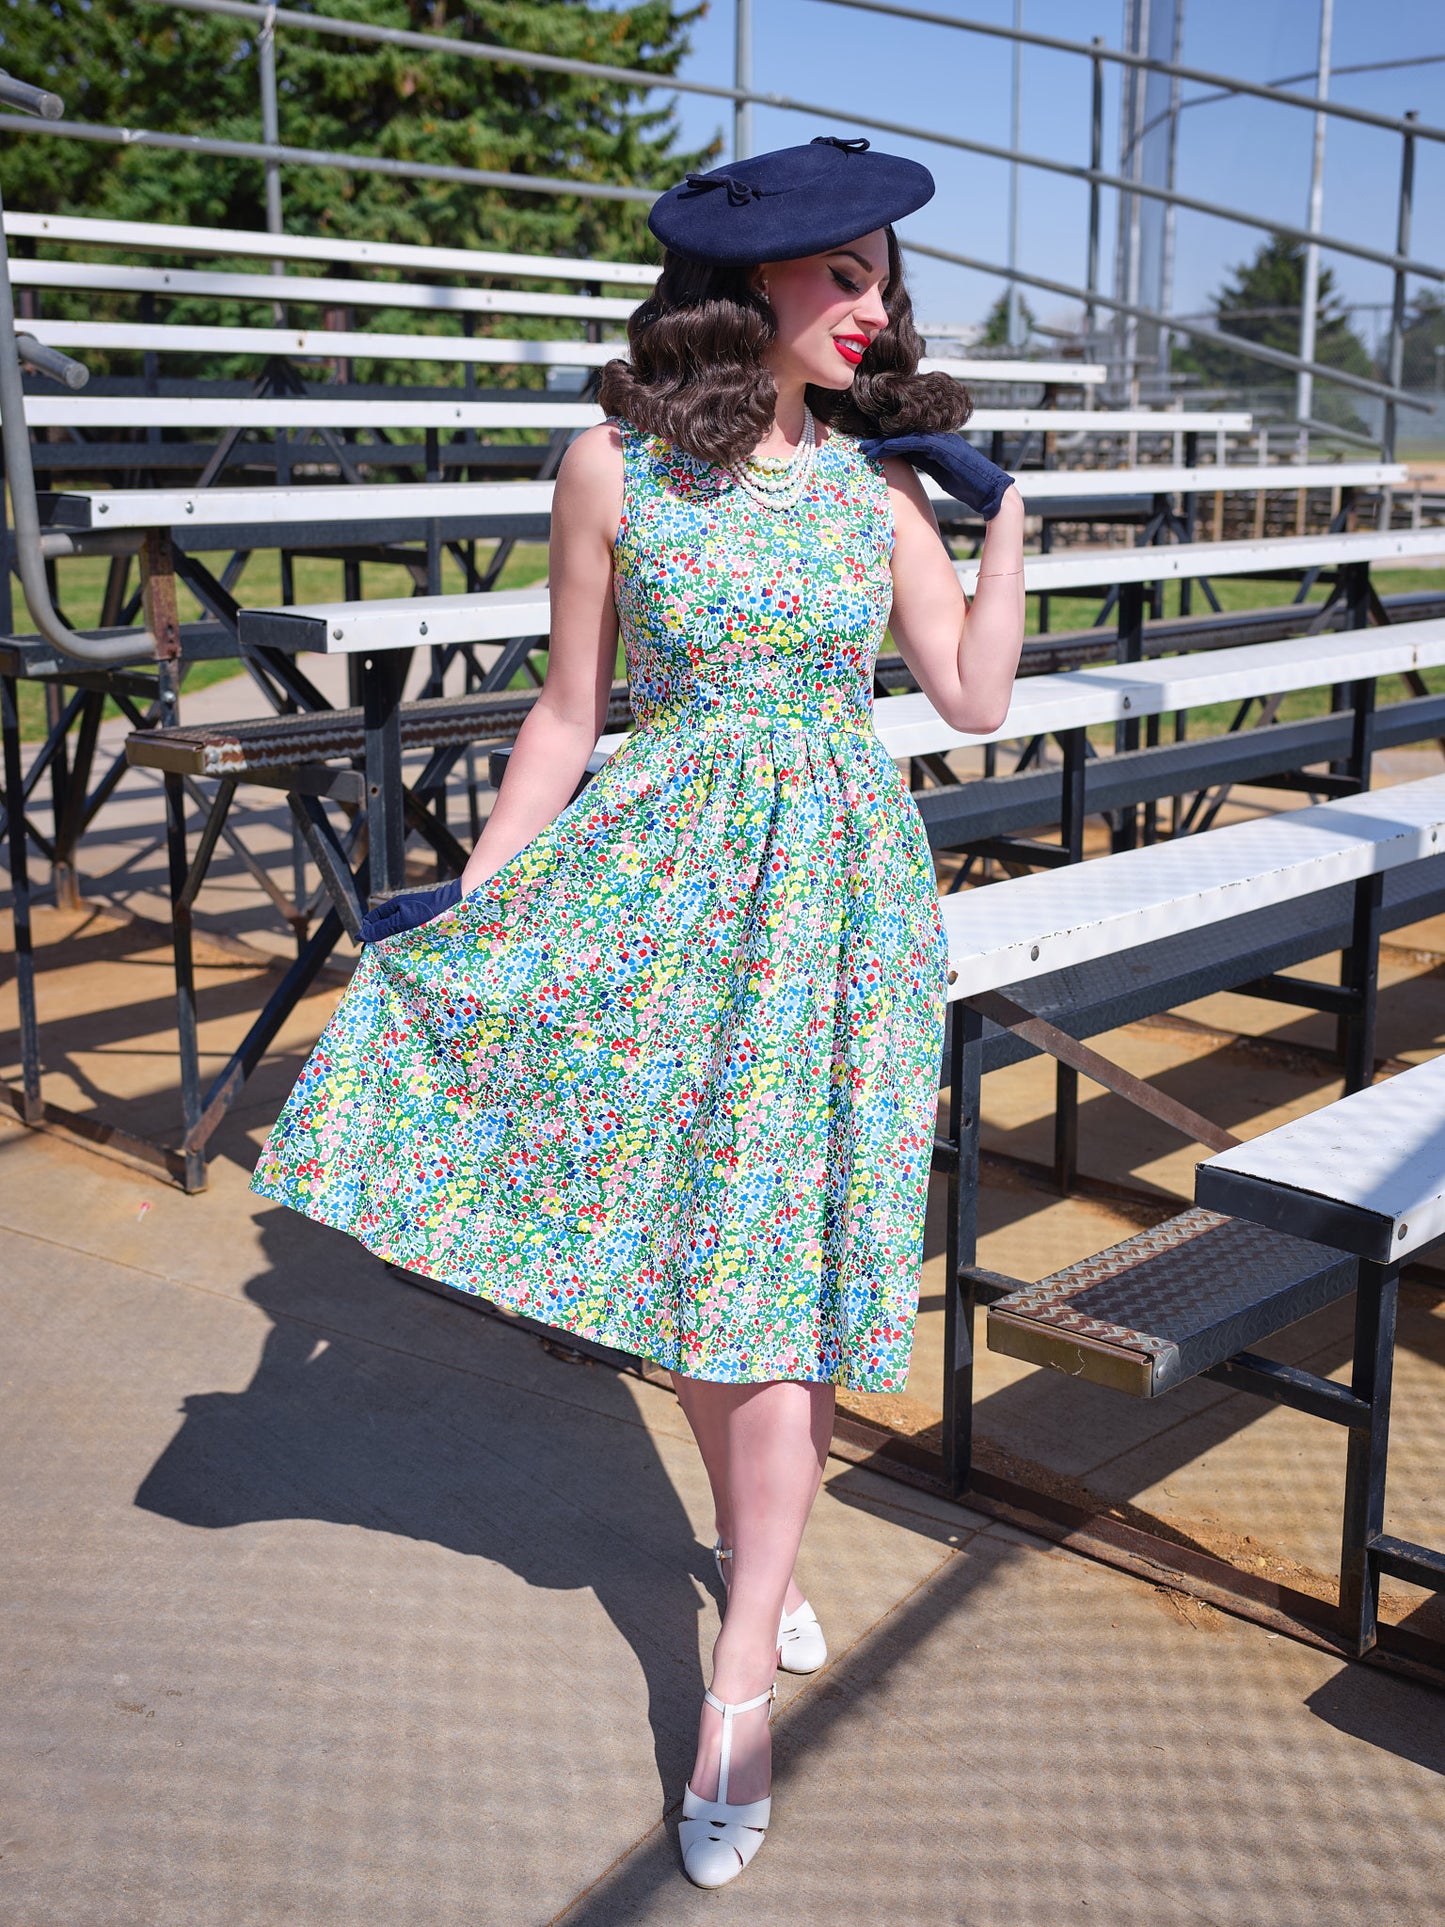 a model standing in front of bleachers wearing painted floral midi dress